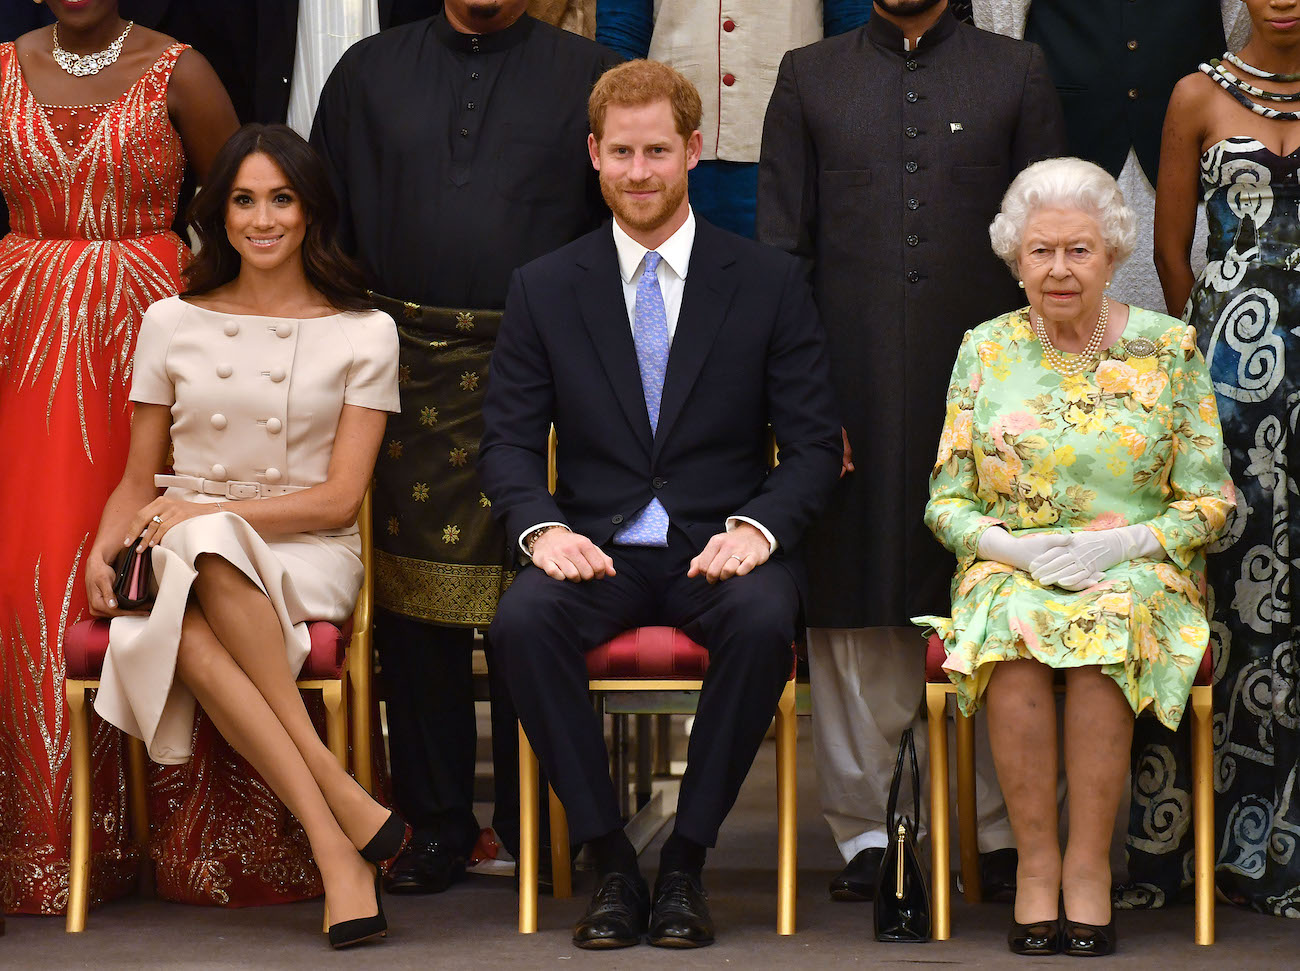 Meghan Markle, Prince Harry, and Queen Elizabeth smile as they sit in chairs.